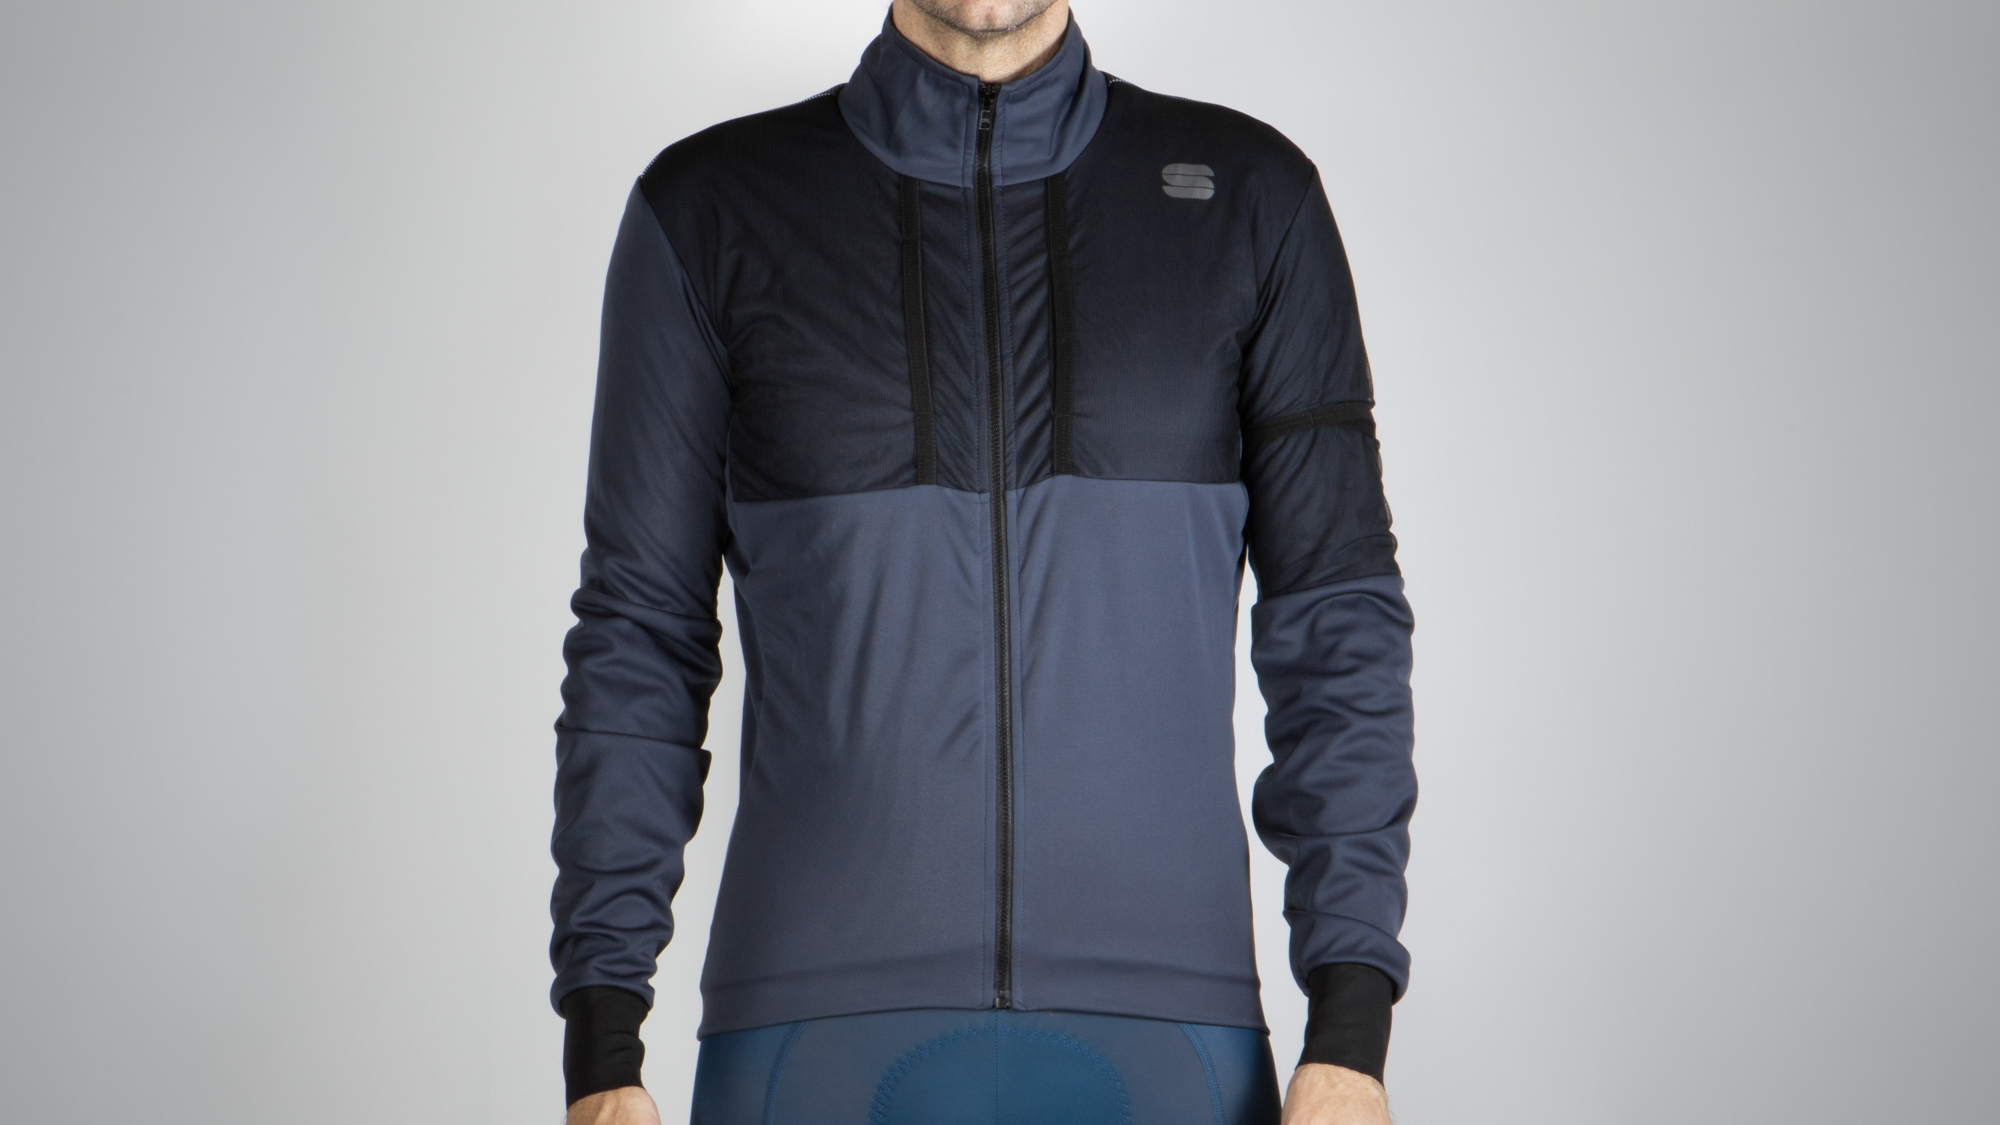 Sportful Supergiara jacket review: Designed for gravel cycling 